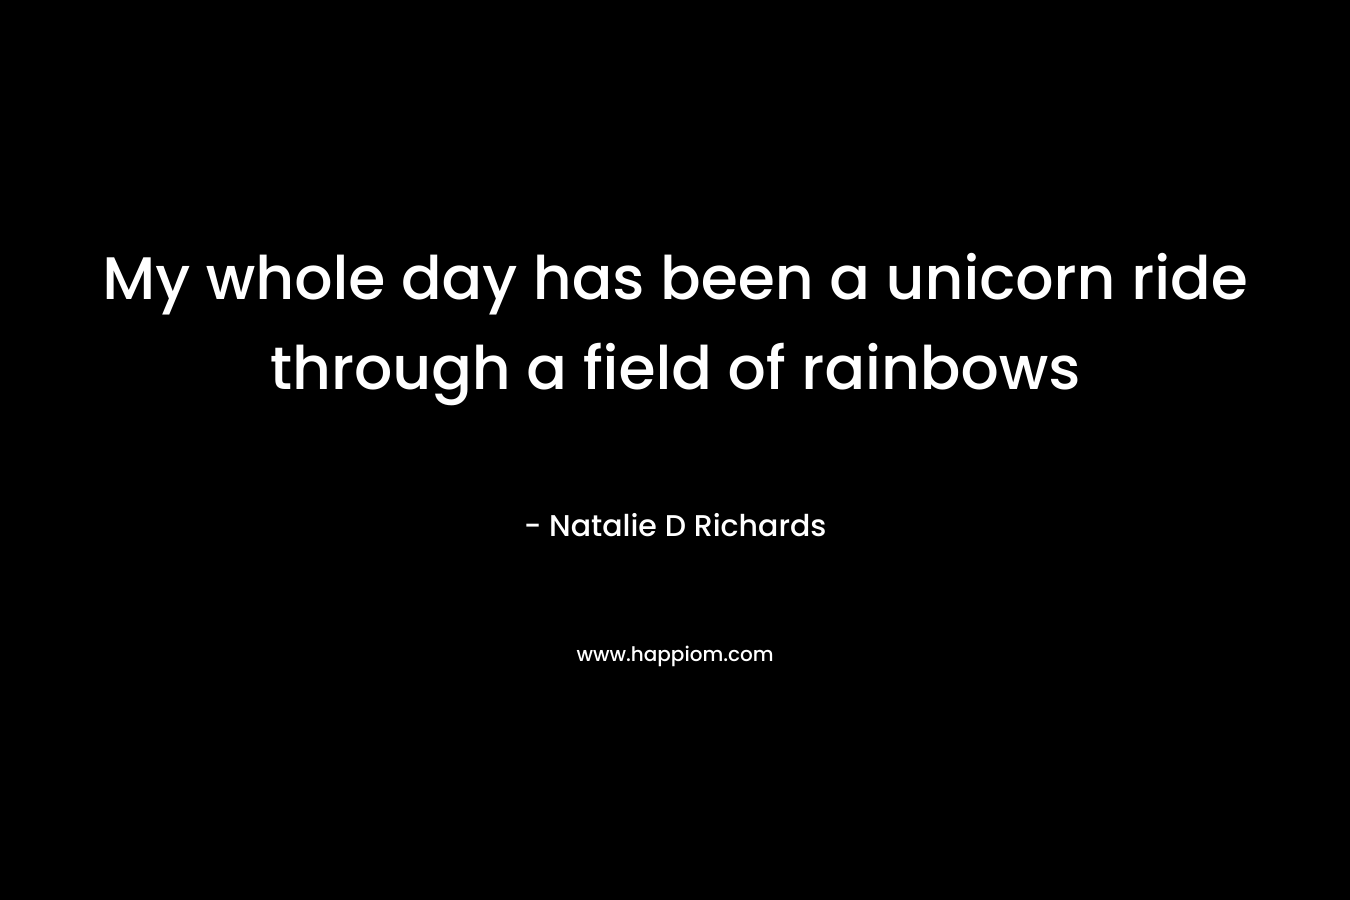 My whole day has been a unicorn ride through a field of rainbows – Natalie D Richards